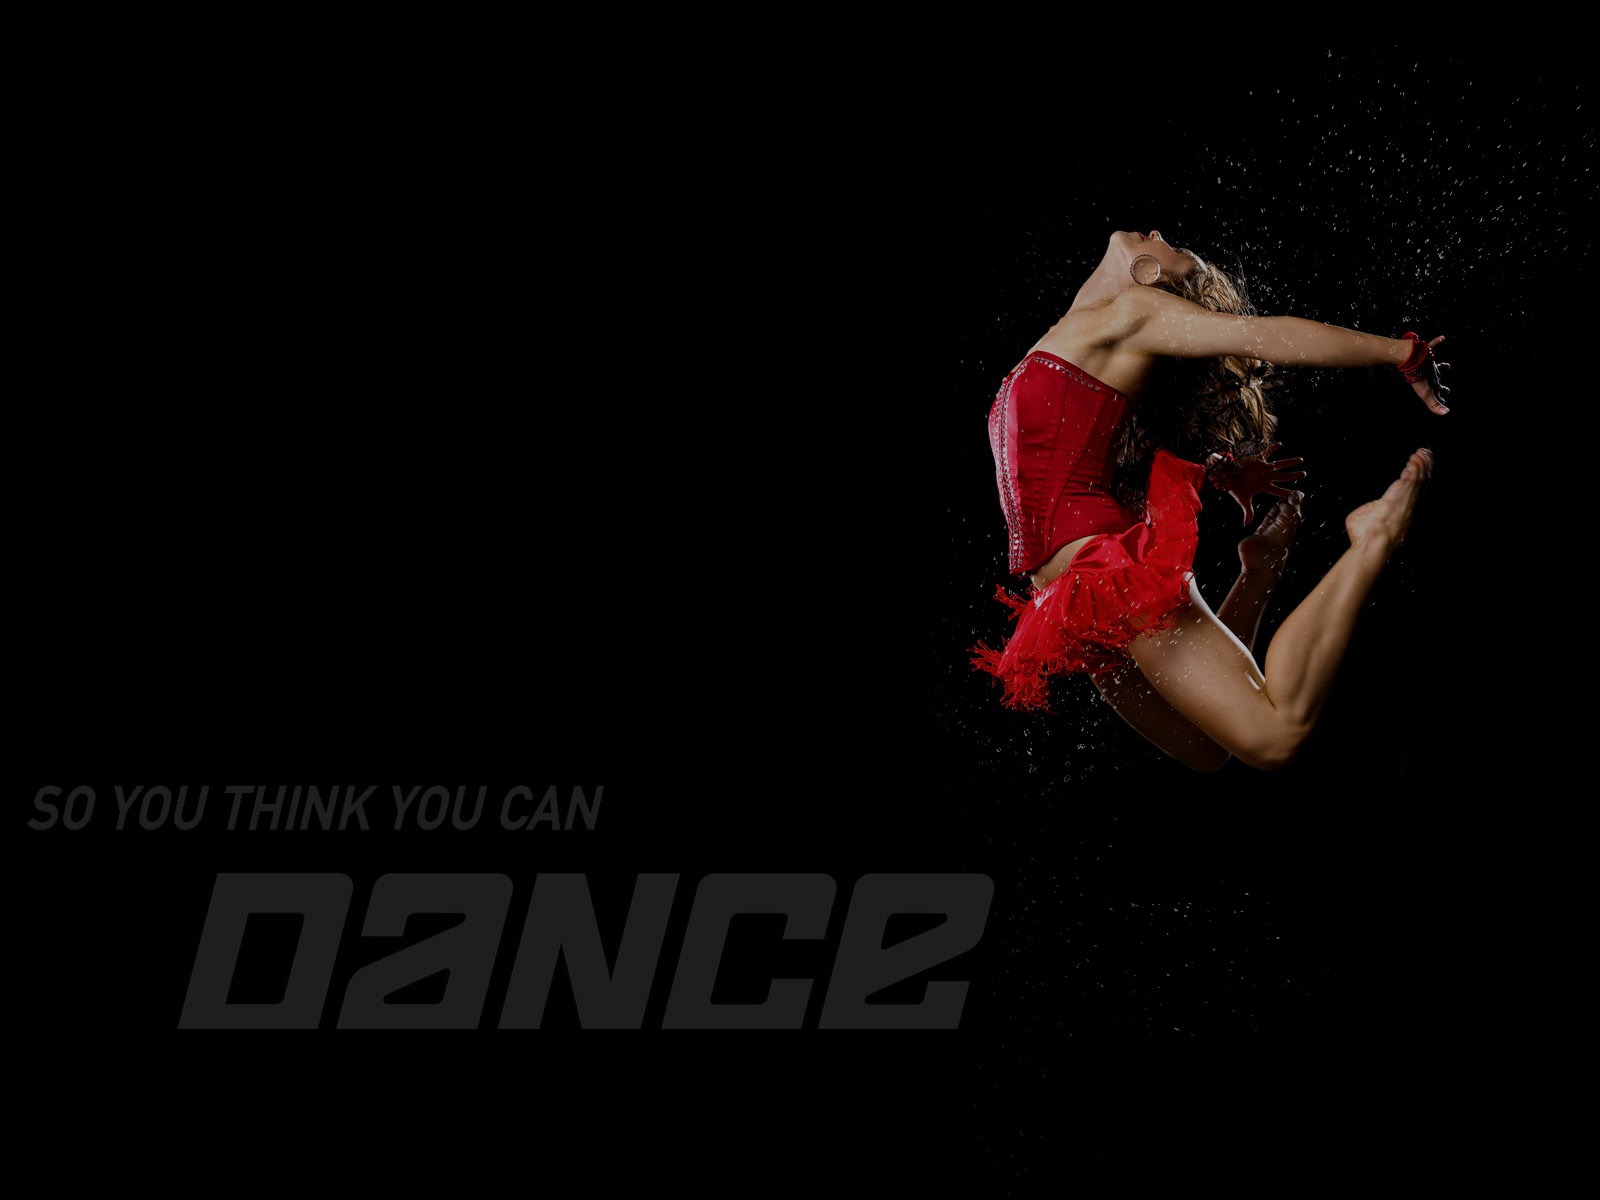 So You Think You Can Dance wallpaper (2) #1 - 1600x1200